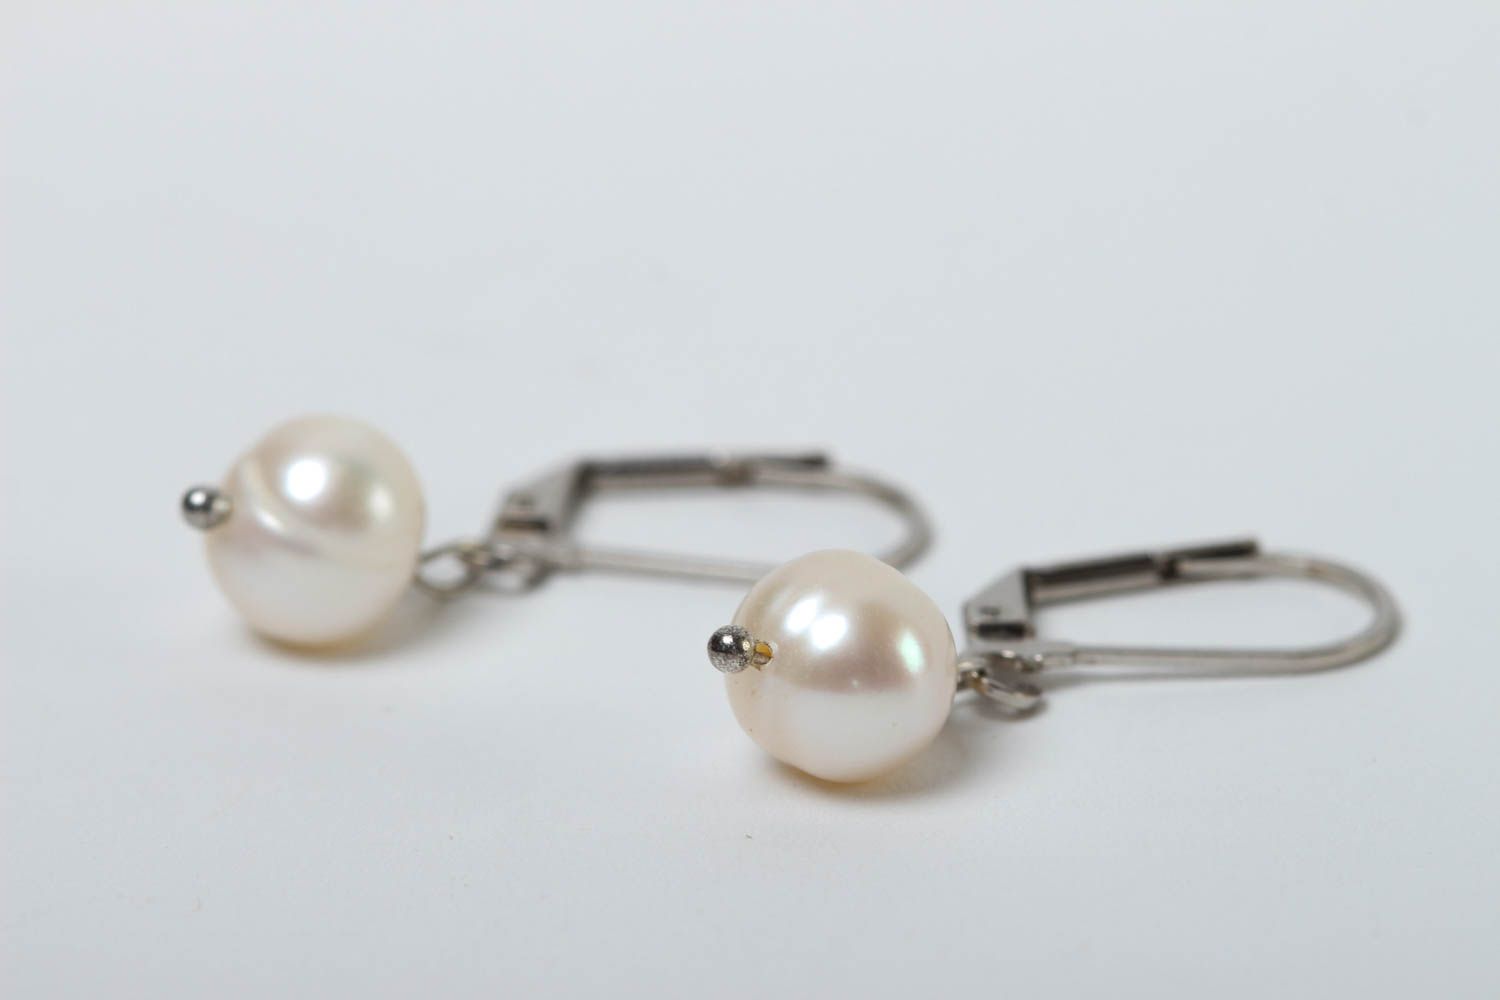 Handmade earrings with pearl beads earrings with charms stylish jewelry photo 3